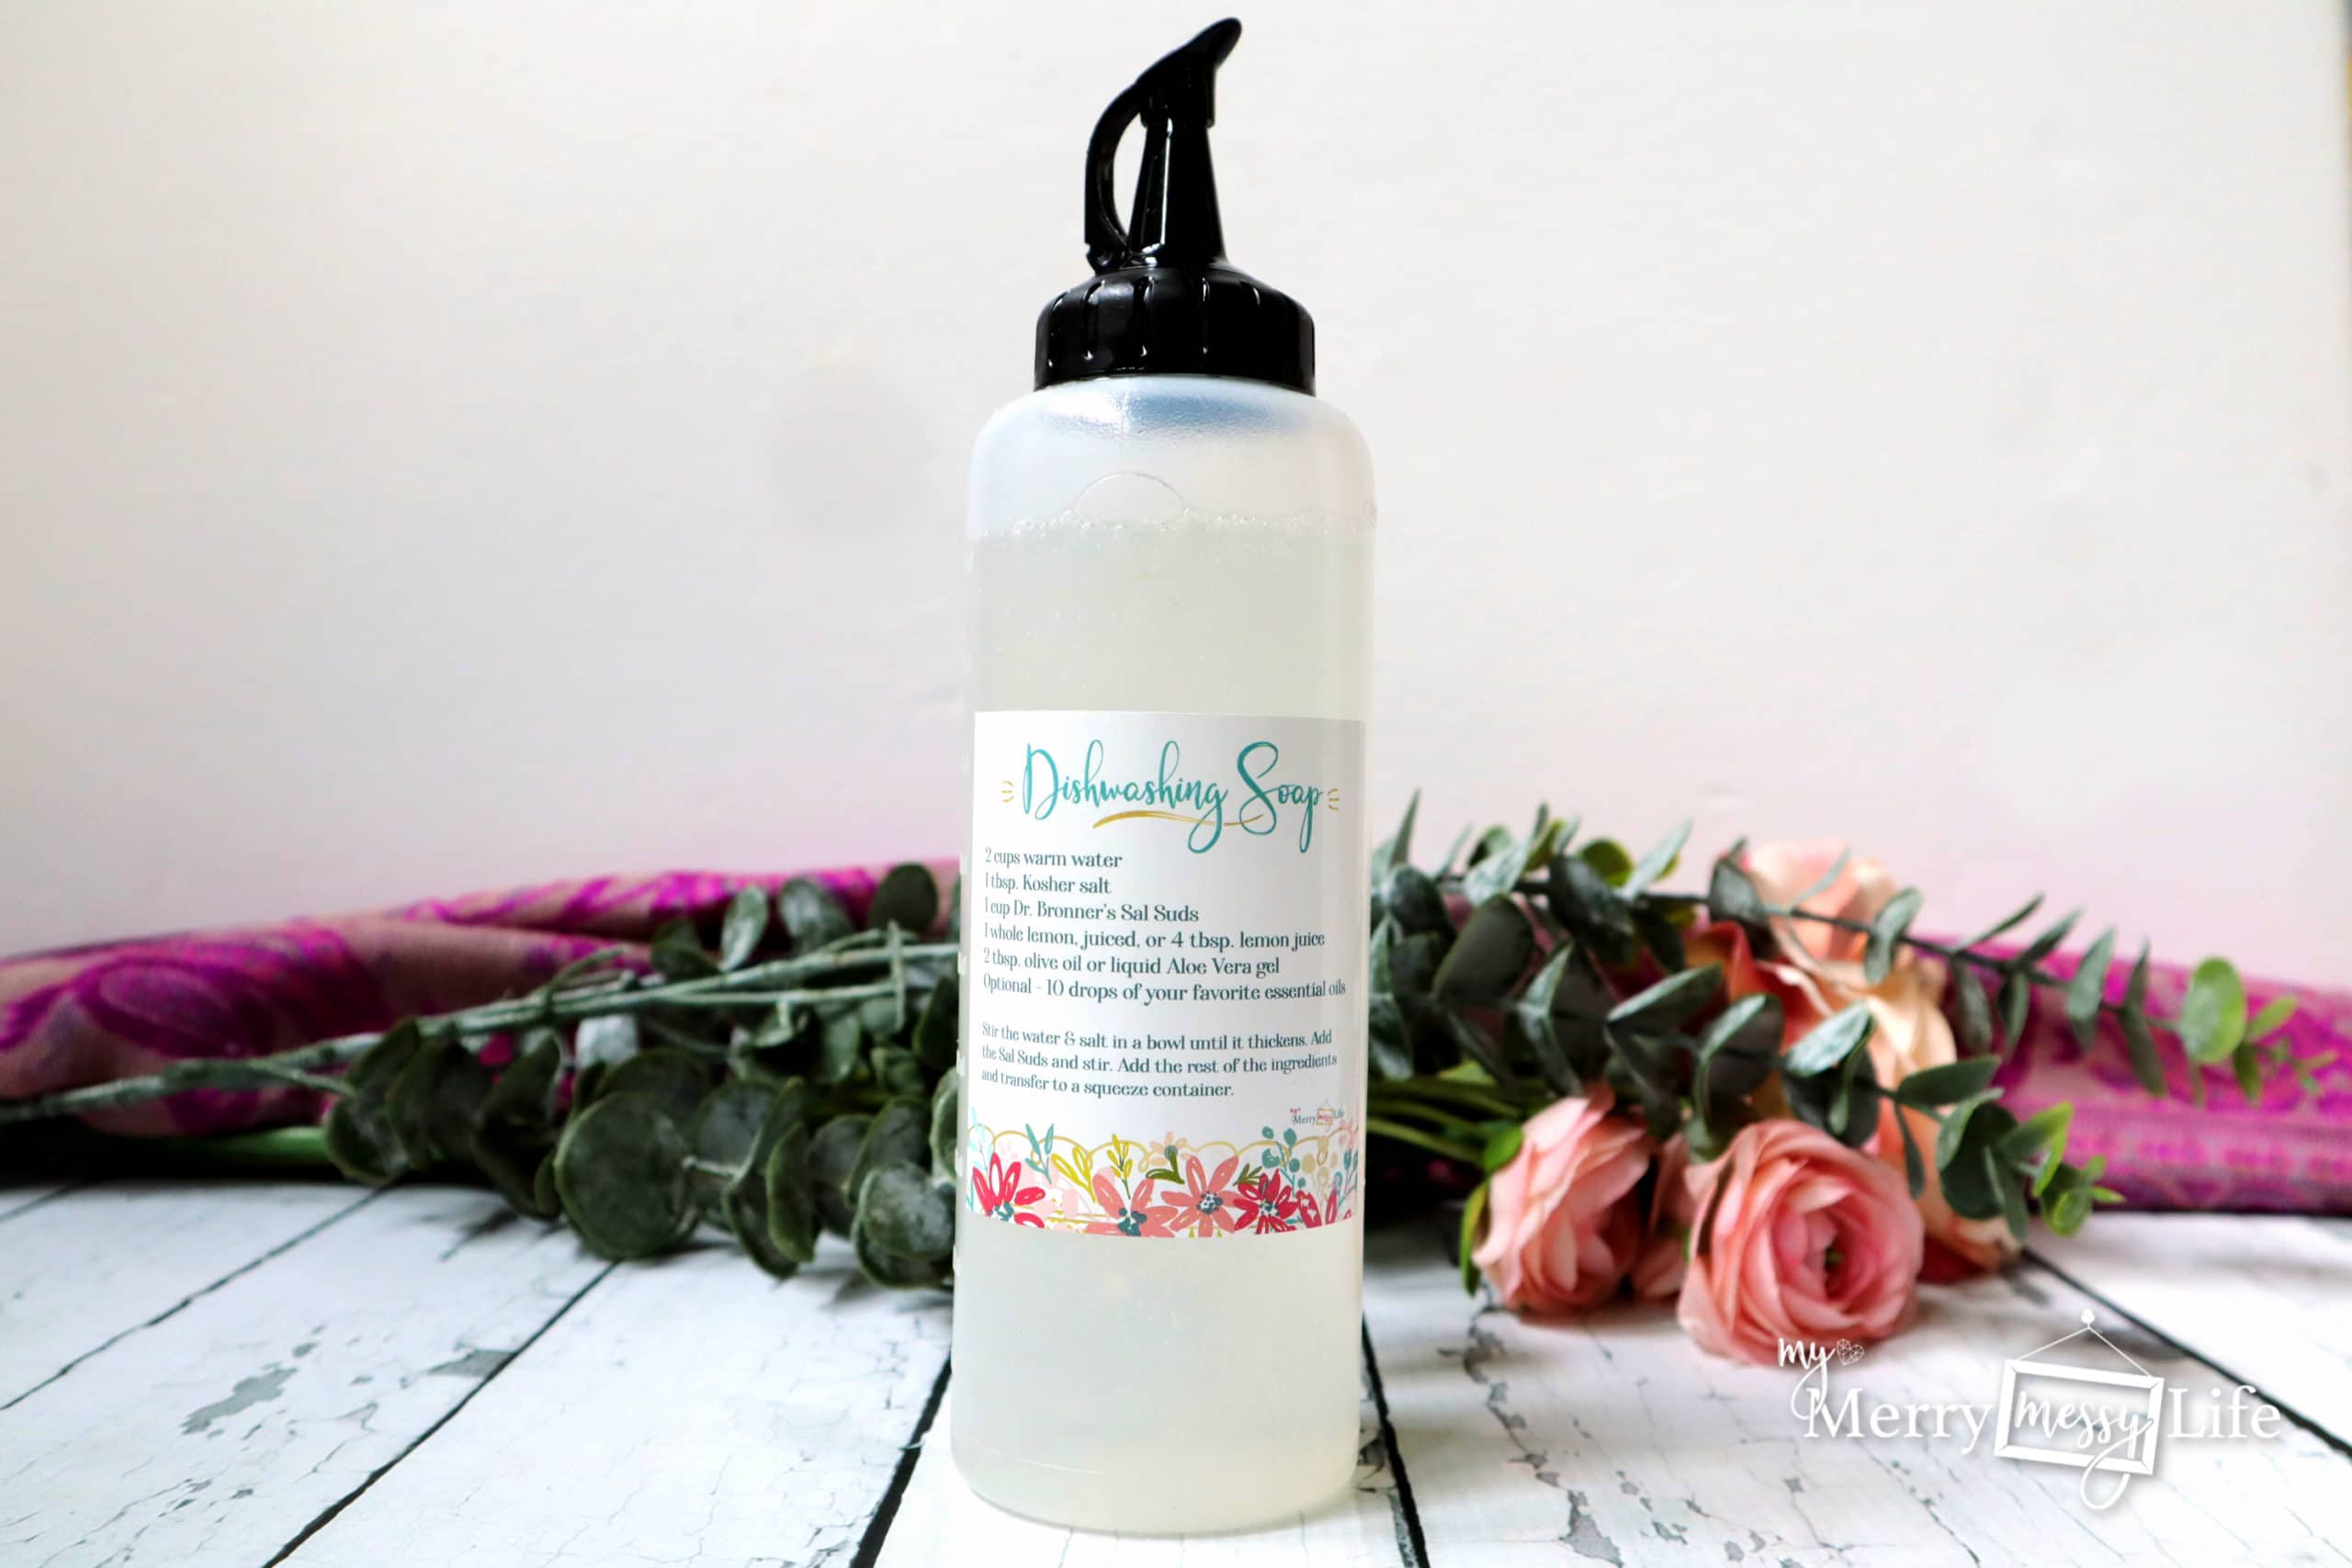 It’s Easy to Make this Natural Dishwashing Soap at Home